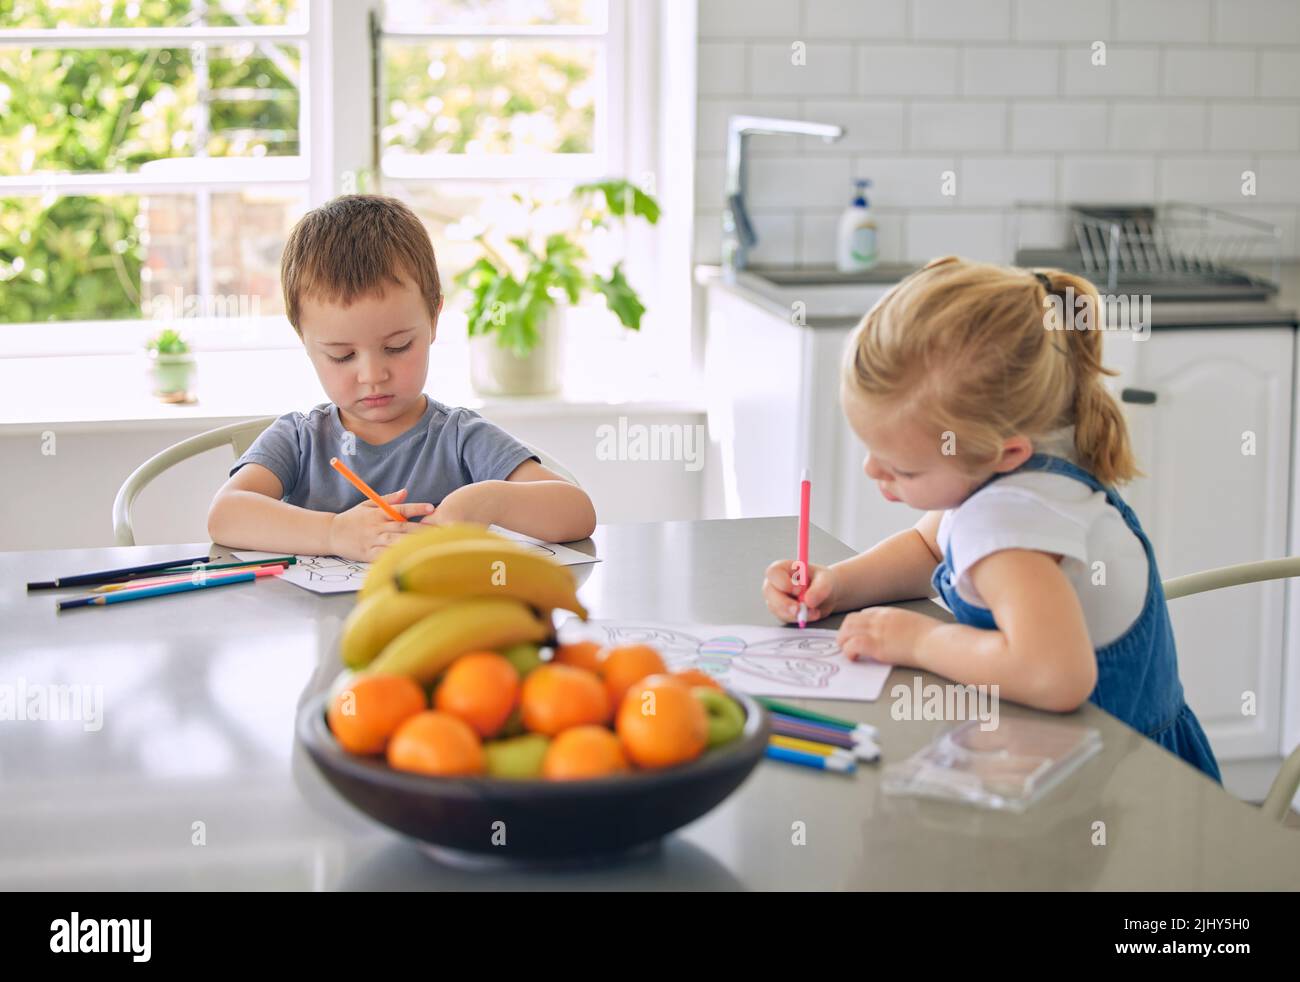 Caucasian siblings drawing pictures together. Brother and sister doing homework. Children colouring in sketches in their kitchen. Little girl drawing Stock Photo